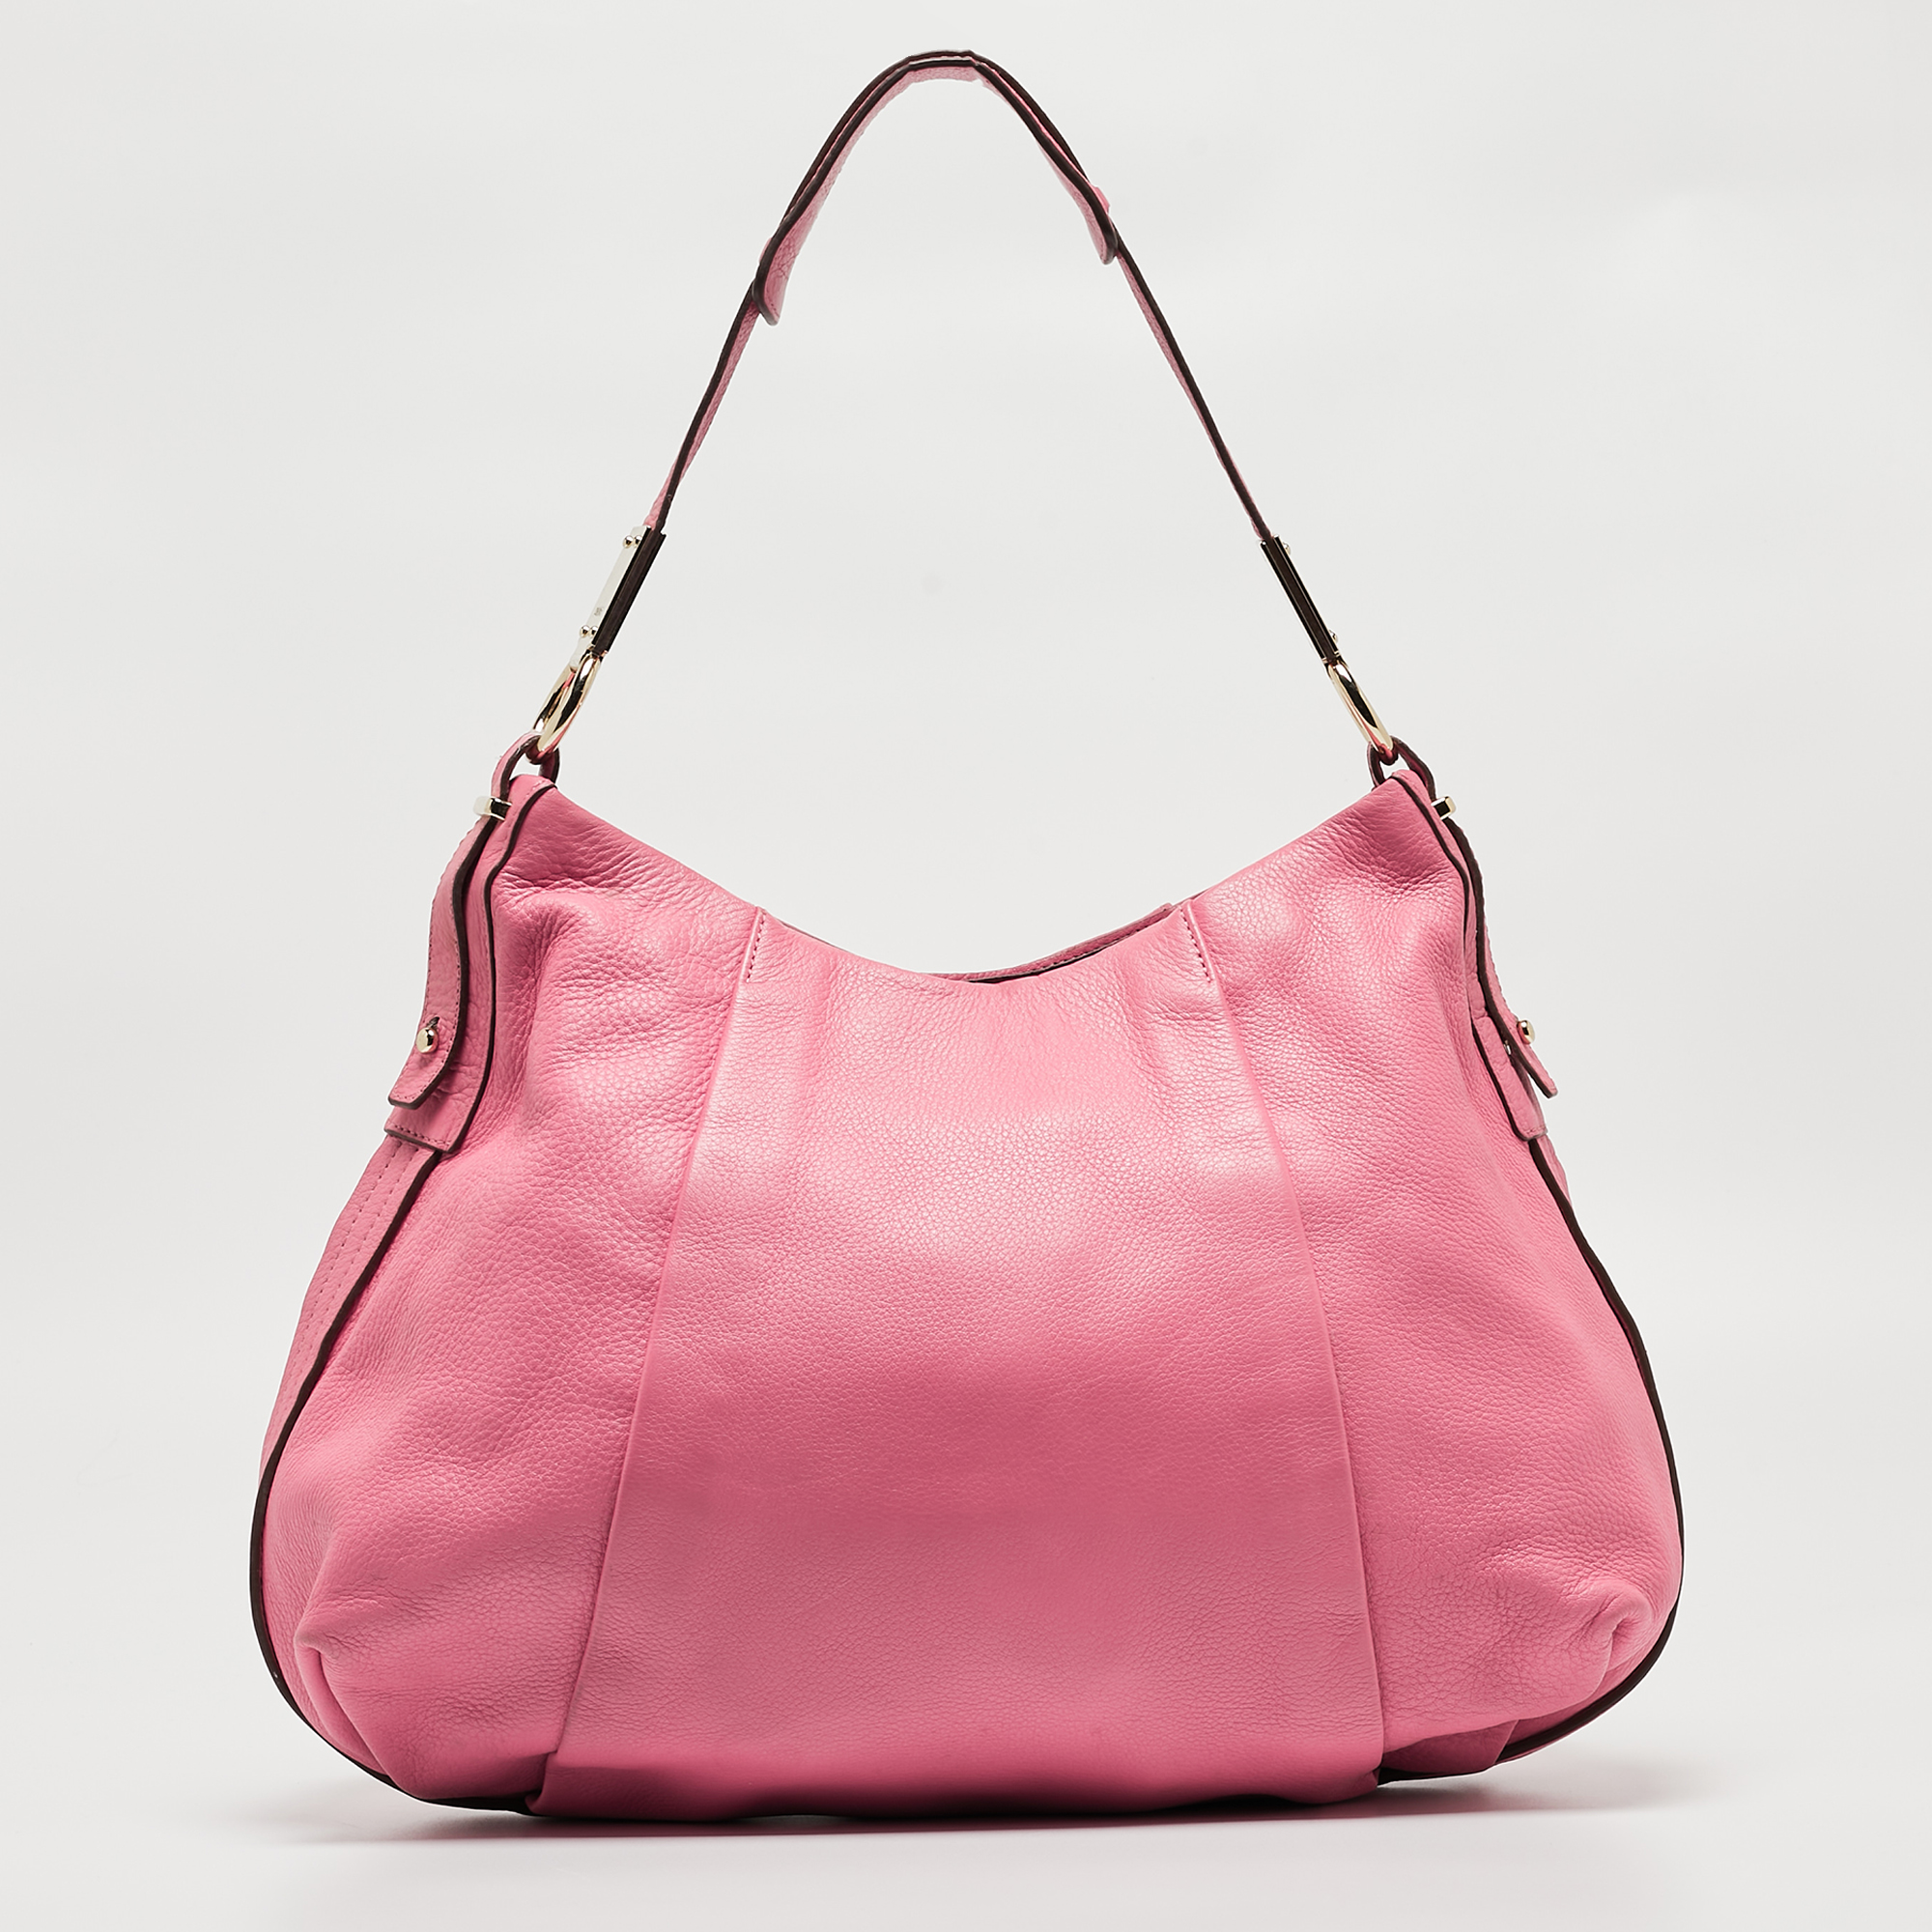 DKNY Pink Leather Pleated Hobo